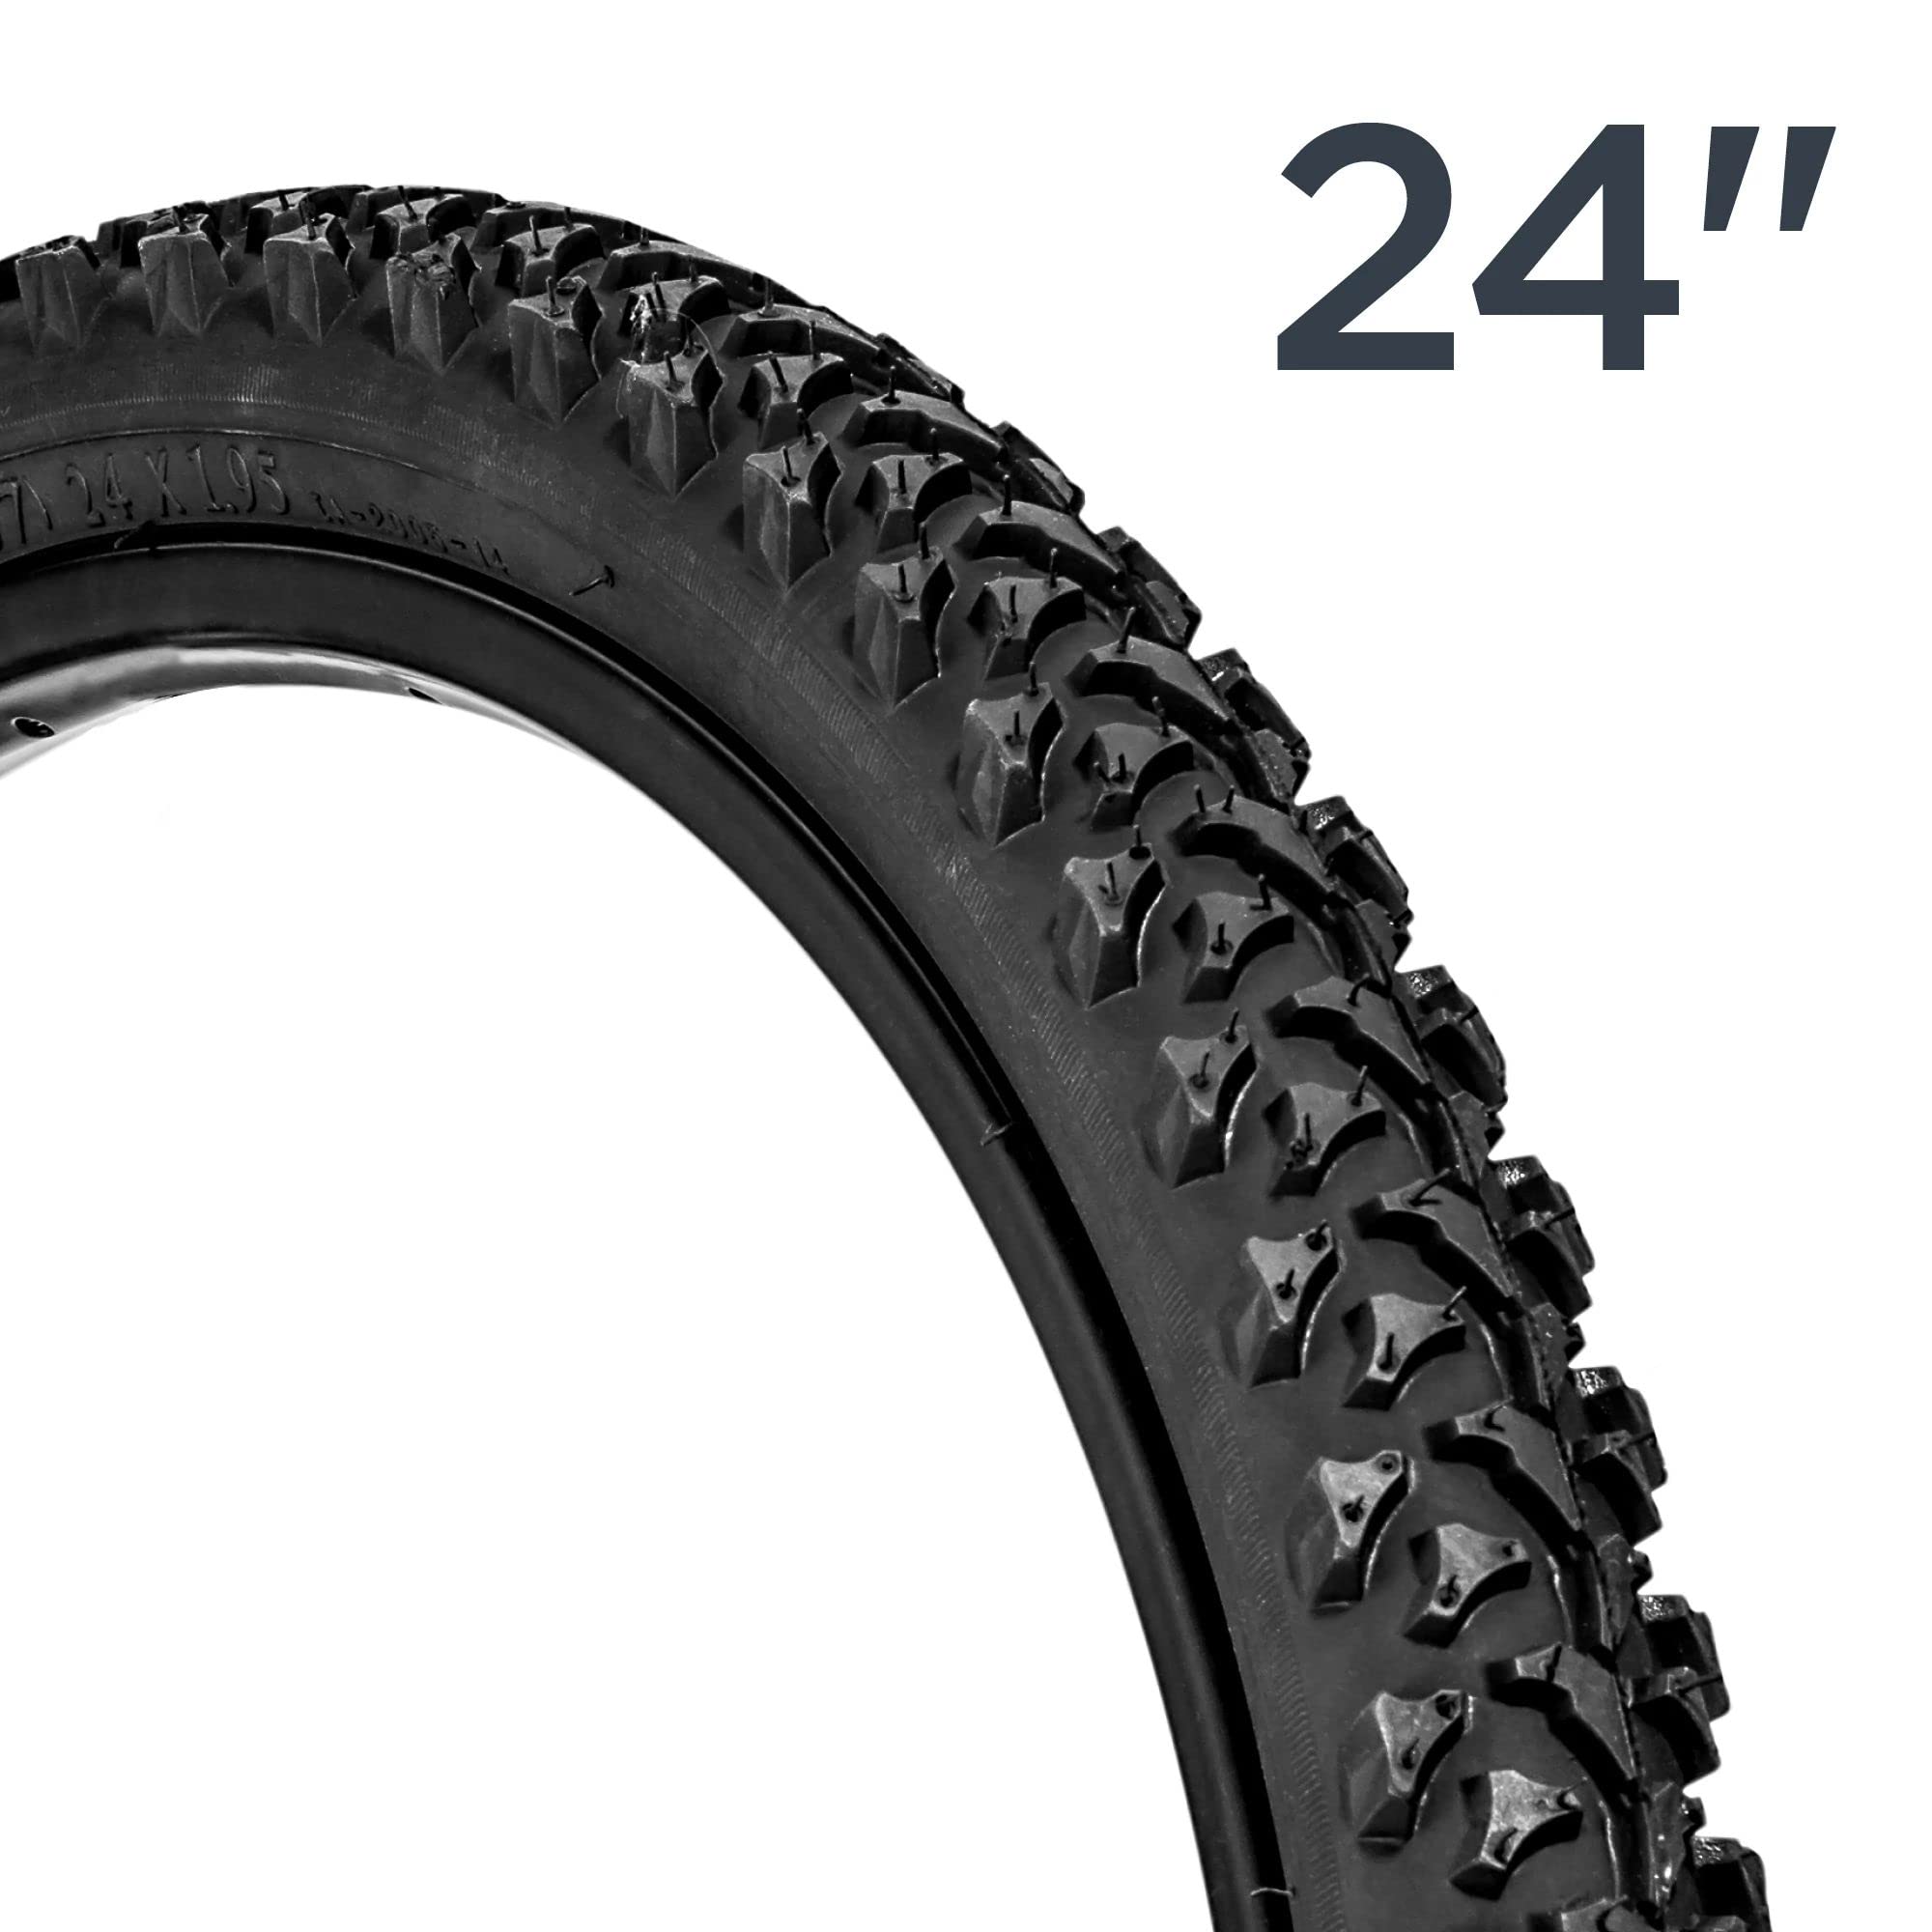 24 x 1.95" Schwinn Replacement Bike Tire, Mountain Bike, High Traction Tread Black with Kevlar Bead $11.19 + Free Shipping w/ Prime or on $35+